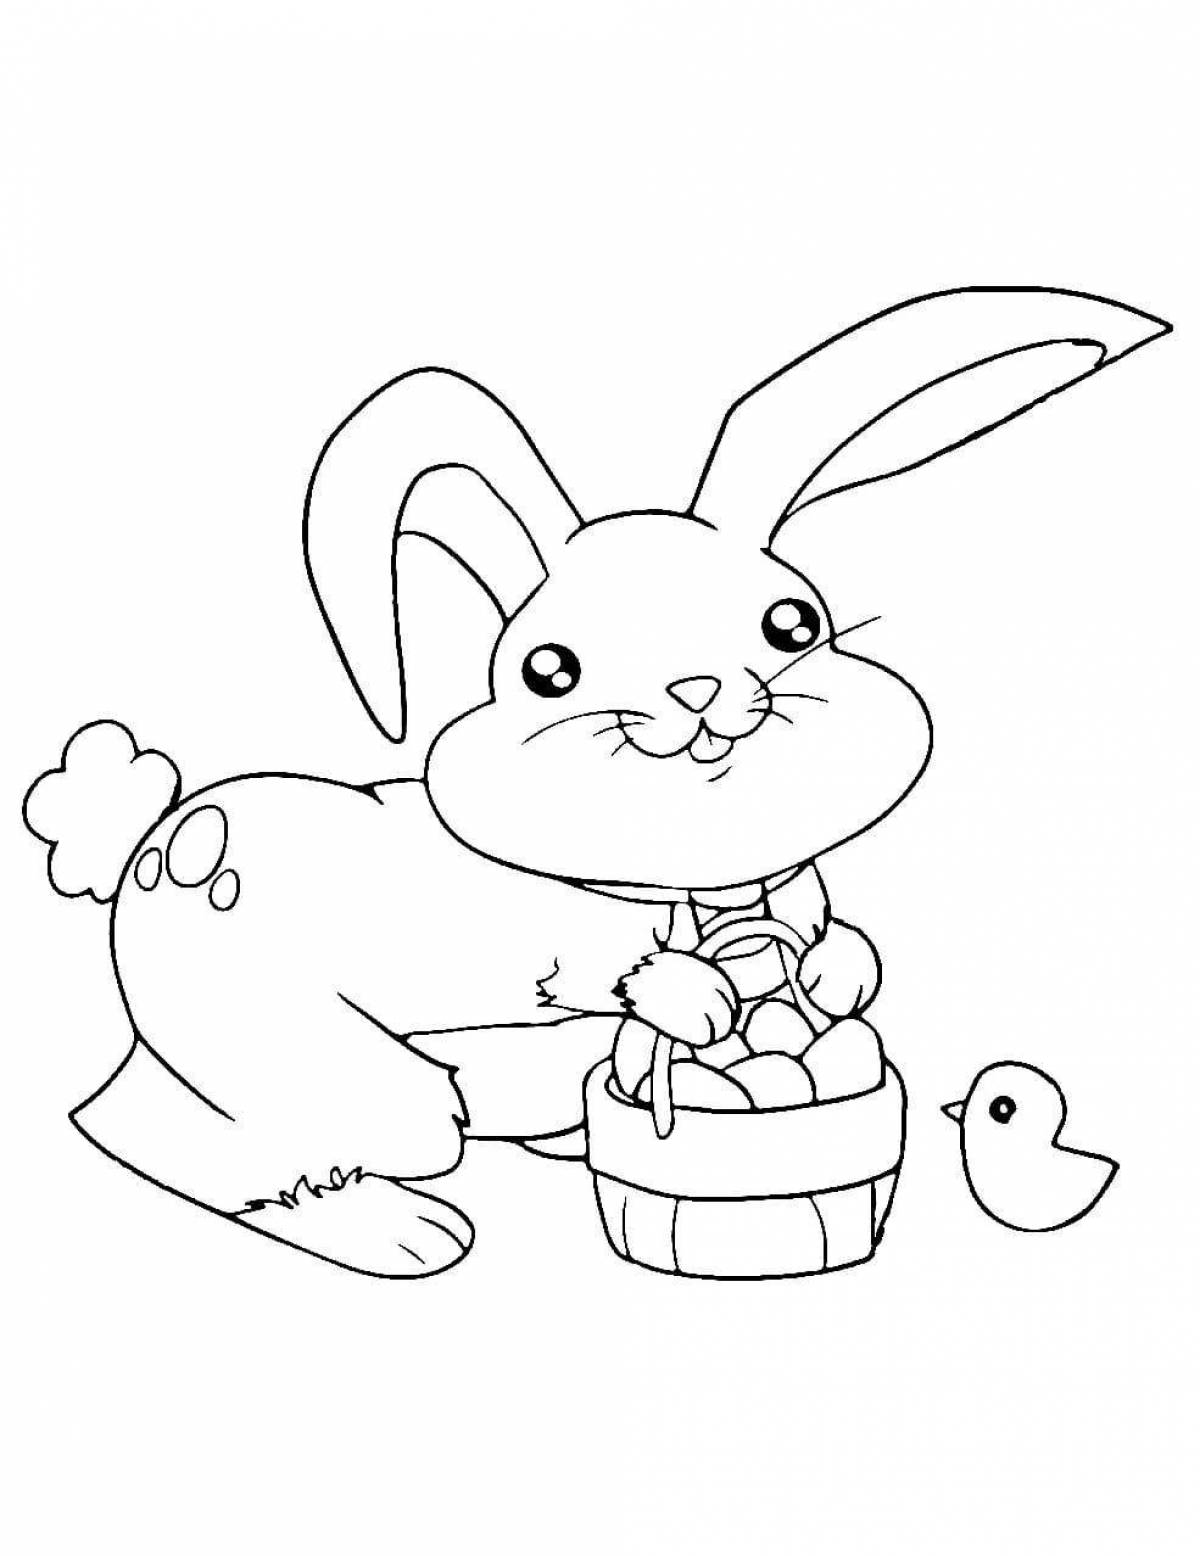 Happy Year of the Bunny coloring page